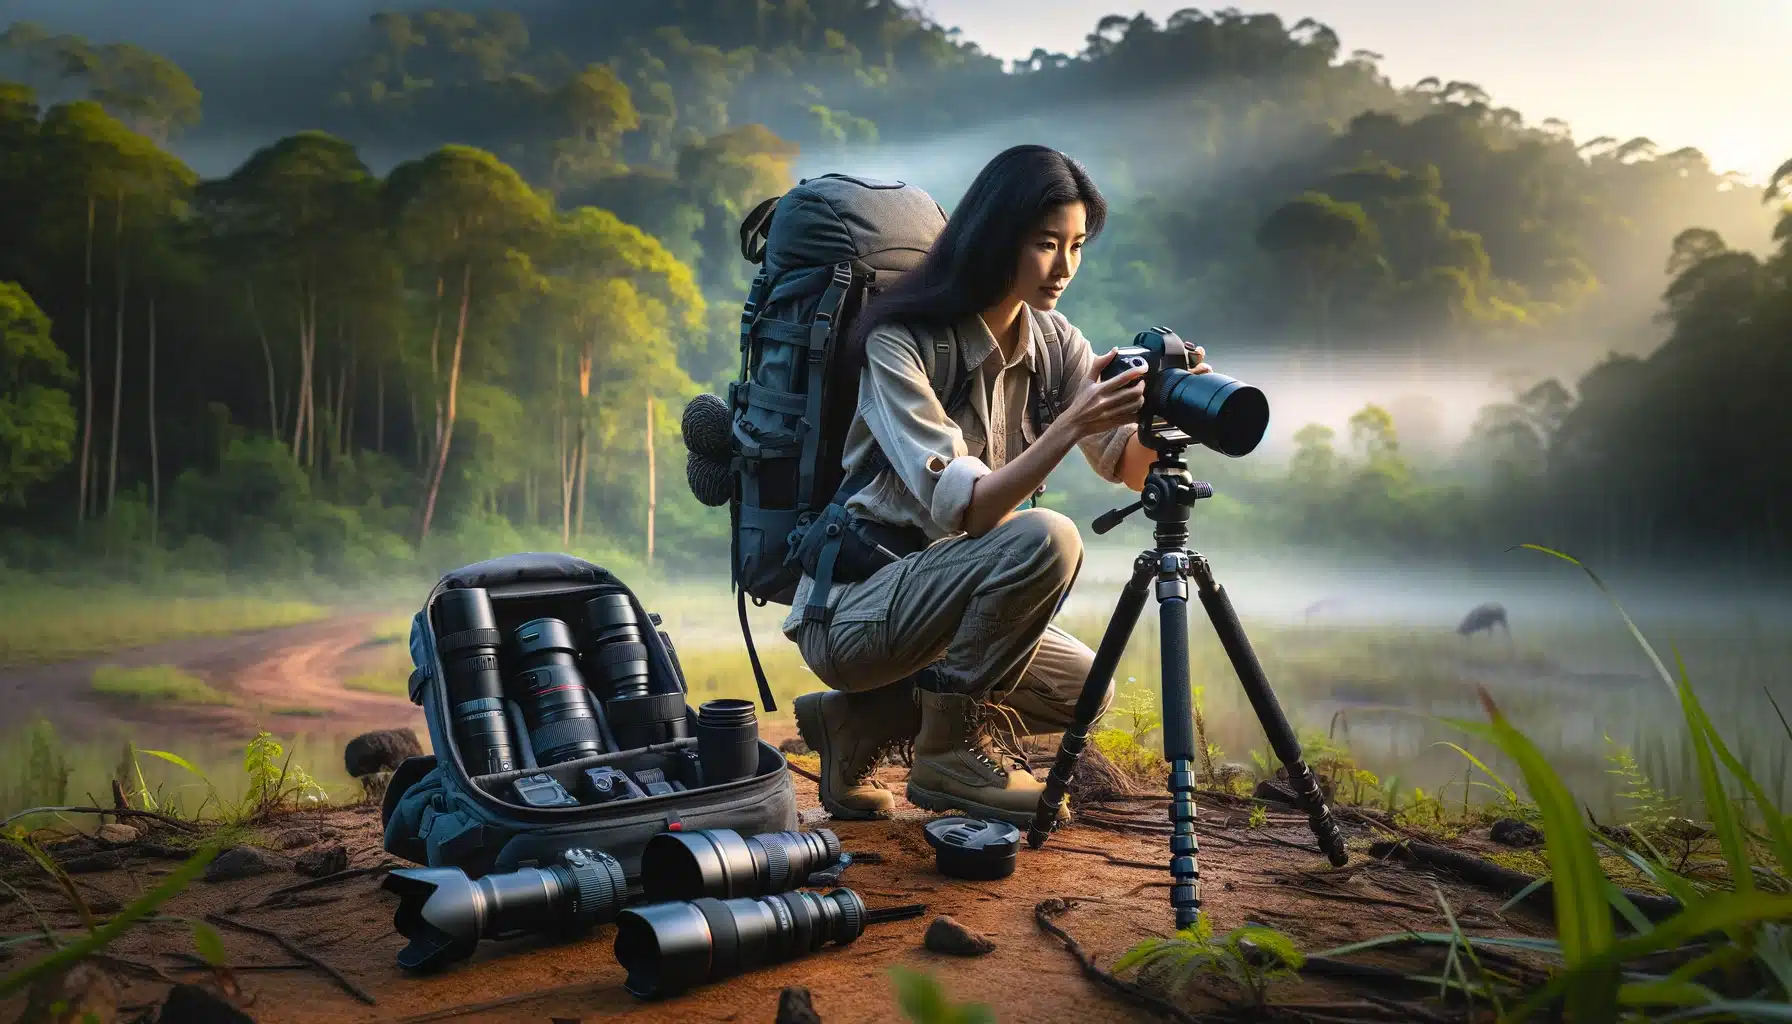 A young Asian female photographer adjusts her camera on a tripod in a wildlife sanctuary, equipped with essential photography tools like lenses and binoculars, showcasing her readiness for capturing wildlife moments.